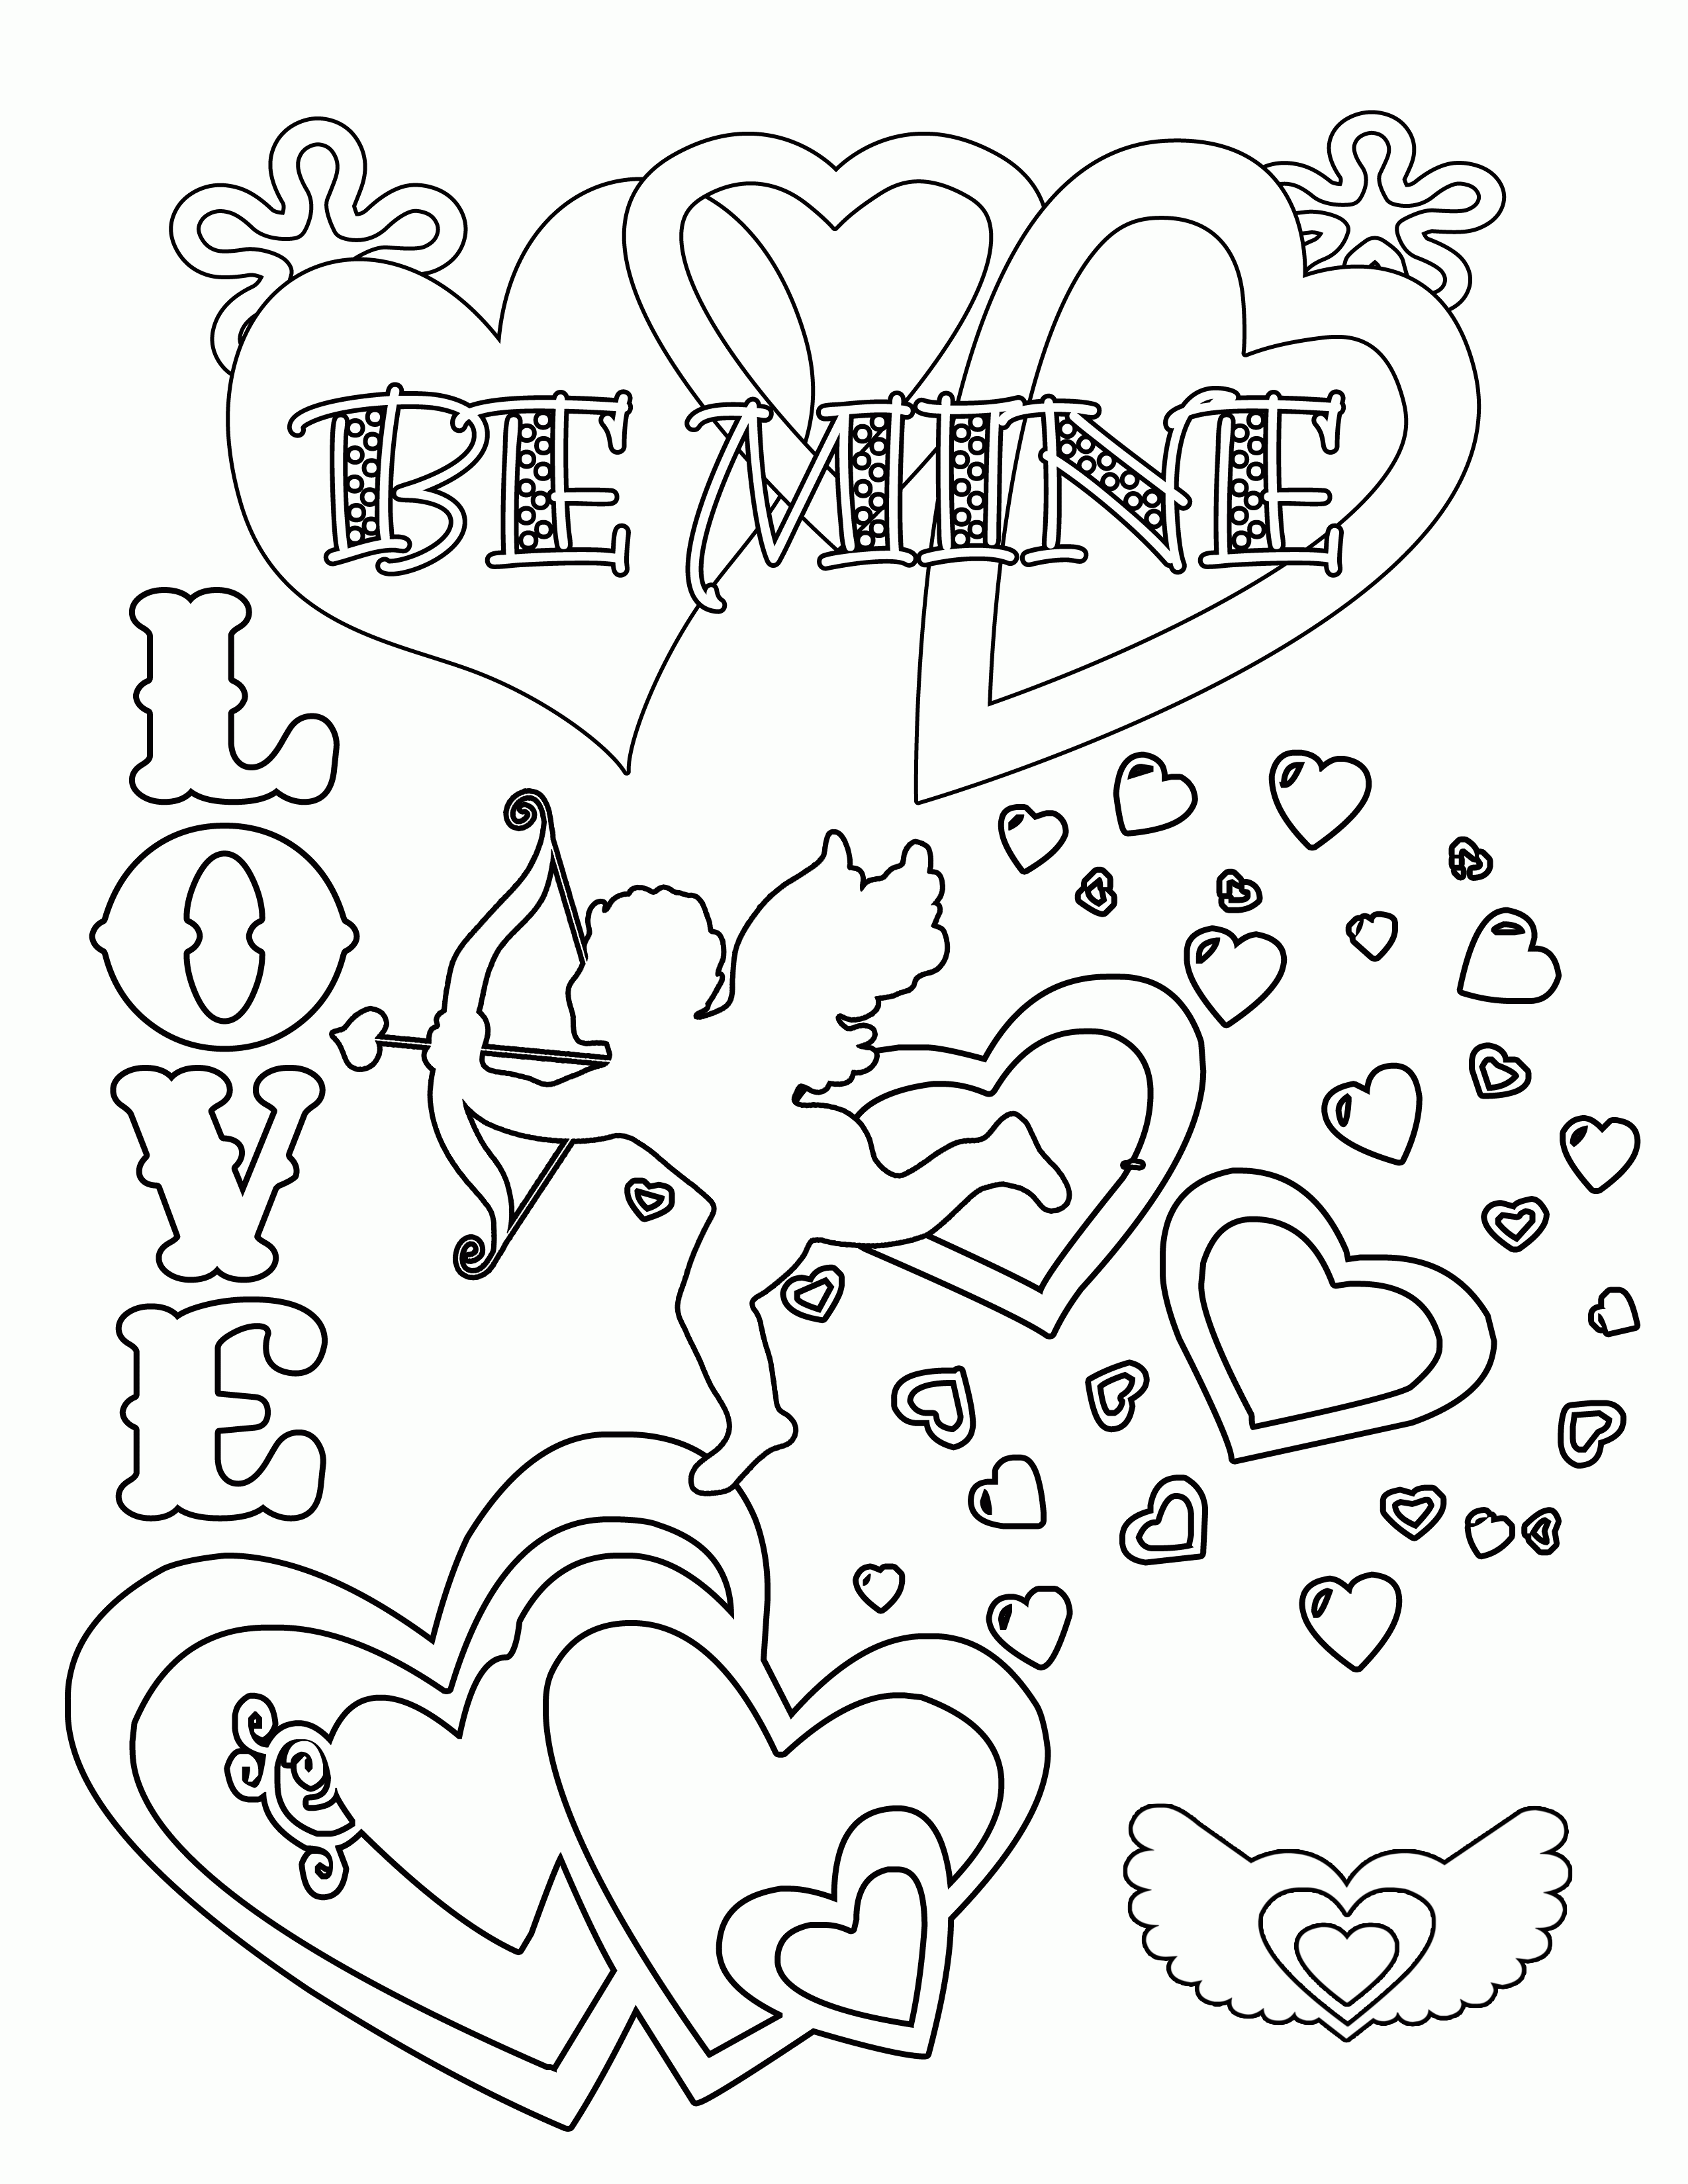 Cat Valentine's Day Coloring Pages Printables   Coloring Pages For ...